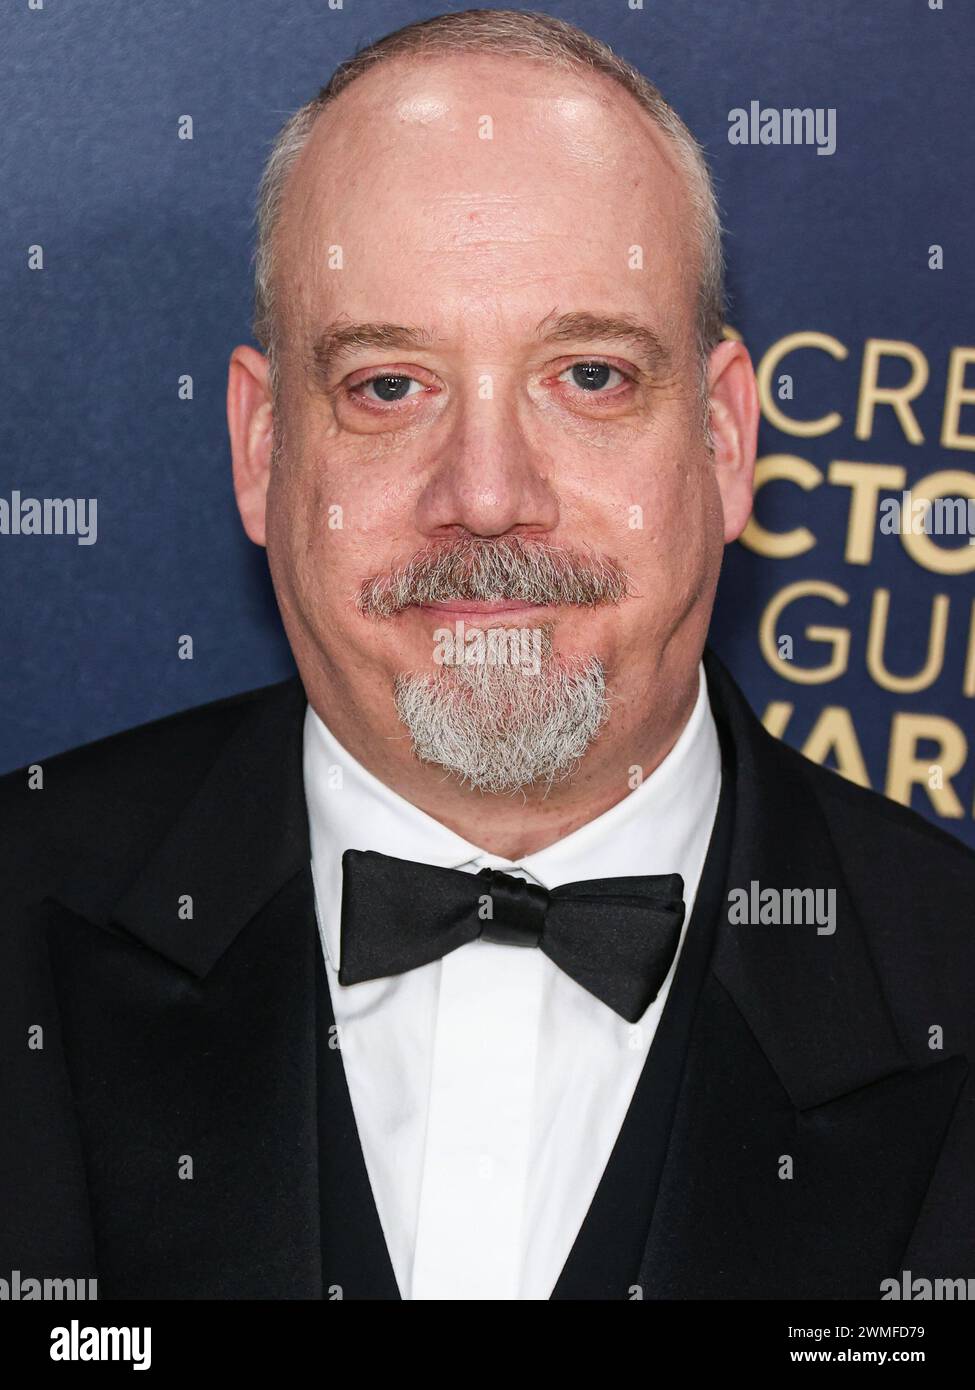 LOS ANGELES, CALIFORNIA, USA - FEBRUARY 24: Paul Giamatti arrives at the 30th Annual Screen Actors Guild Awards held at the Shrine Auditorium and Expo Hall on February 24, 2024 in Los Angeles, California, United States. (Photo by Xavier Collin/Image Press Agency) Stock Photo